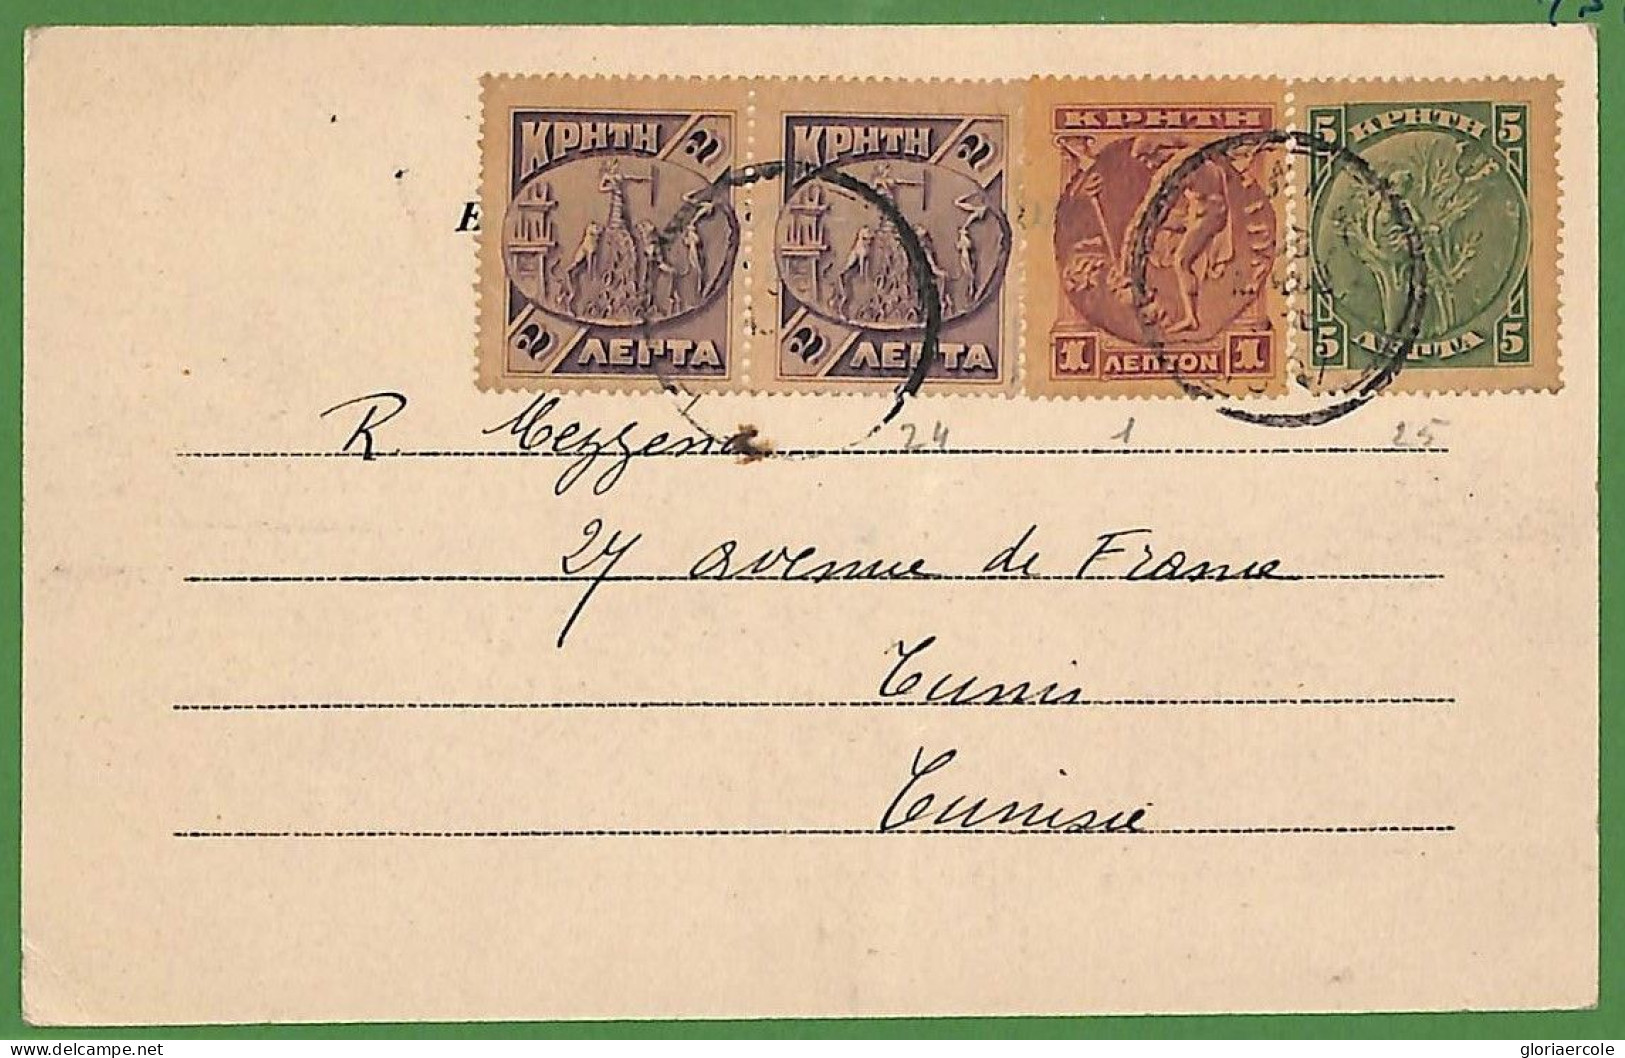 Ad0877 - GREECE - Postal History - Nive Franking On POSTCARD To TUNISIA ! 1900's - Covers & Documents